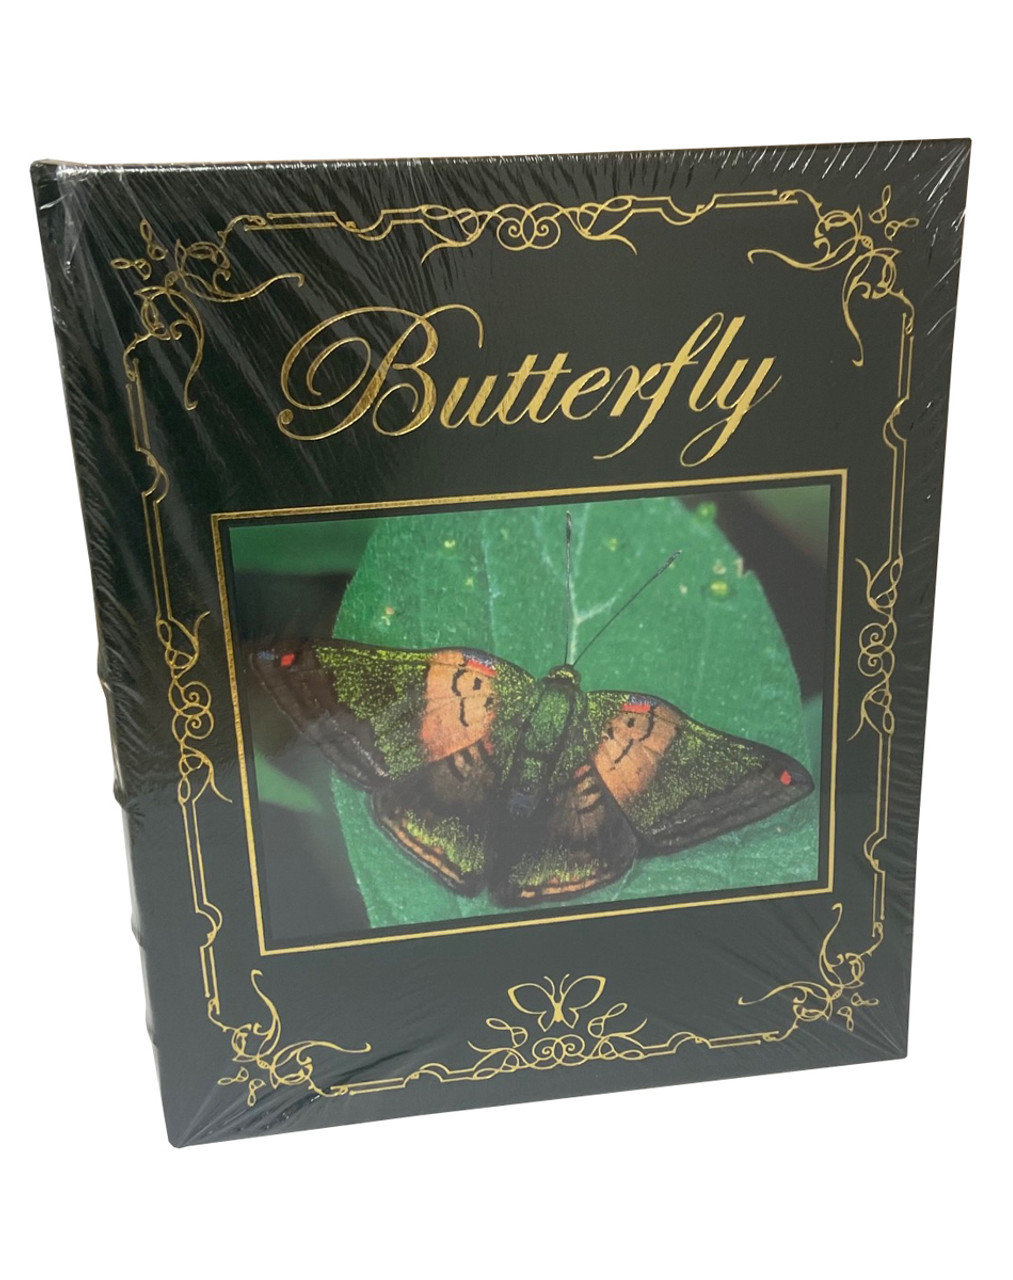 Thomas Marent "Butterfly" Limited Edition, Leather Bound Collector's Edition [Sealed]